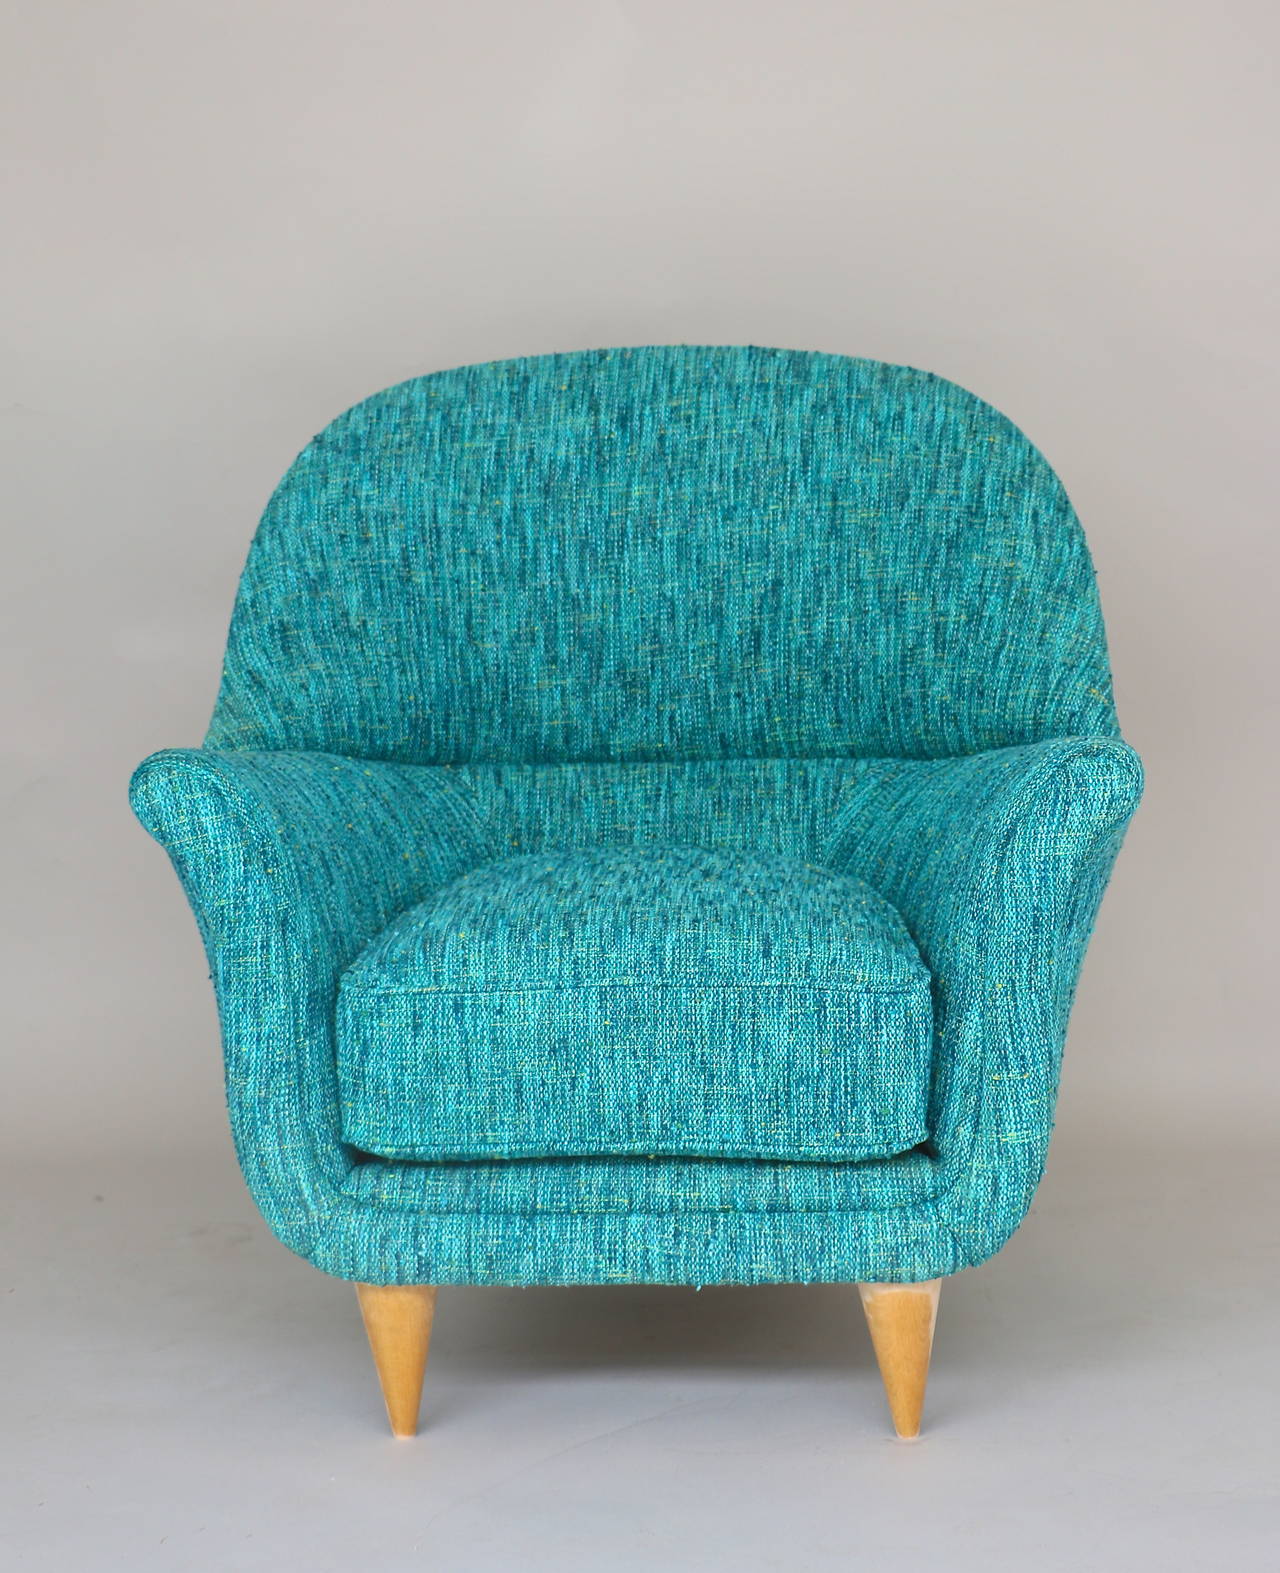 Pair of 1950s Italian Armchairs covered in blue mottled fabric. Fabric is from Maison Rubelli.